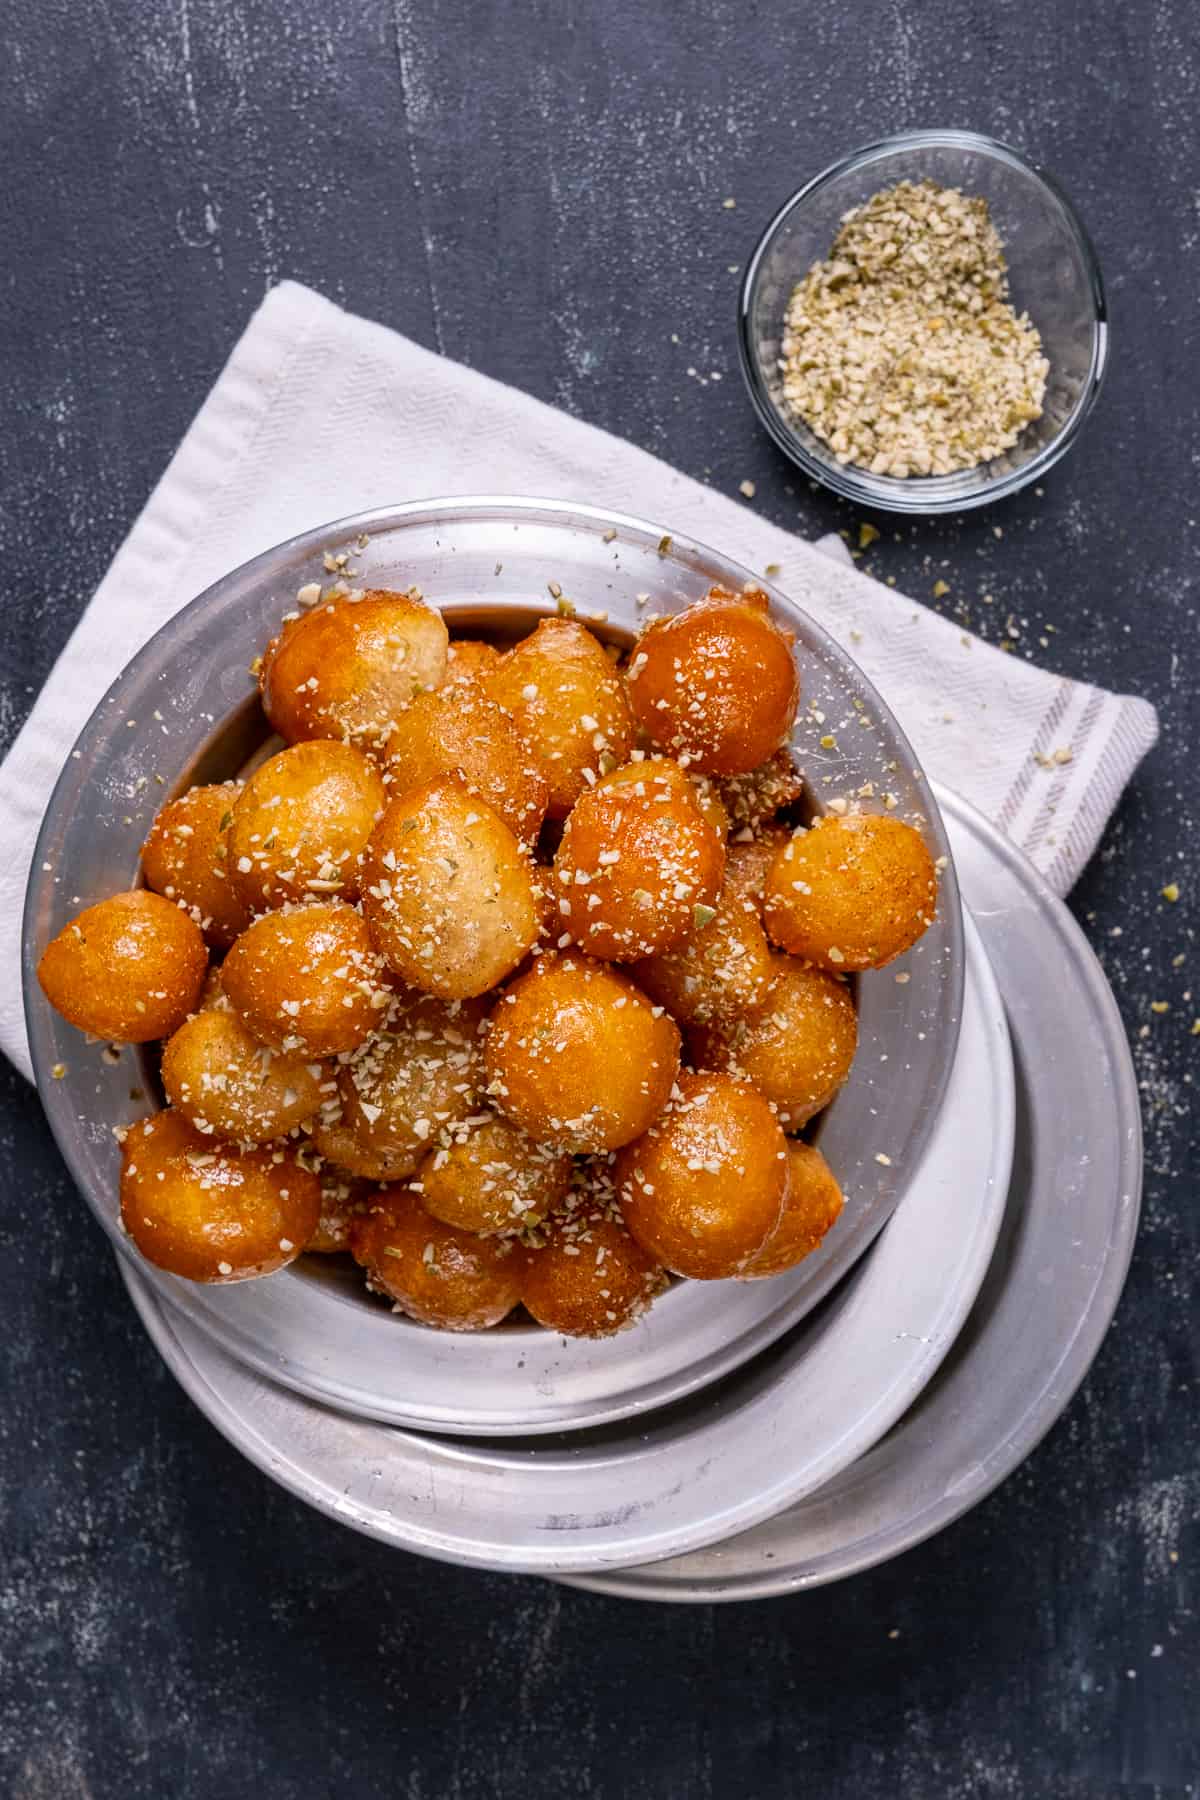 Fried sweet balls garnished with crumbled walnuts on a metal plate.